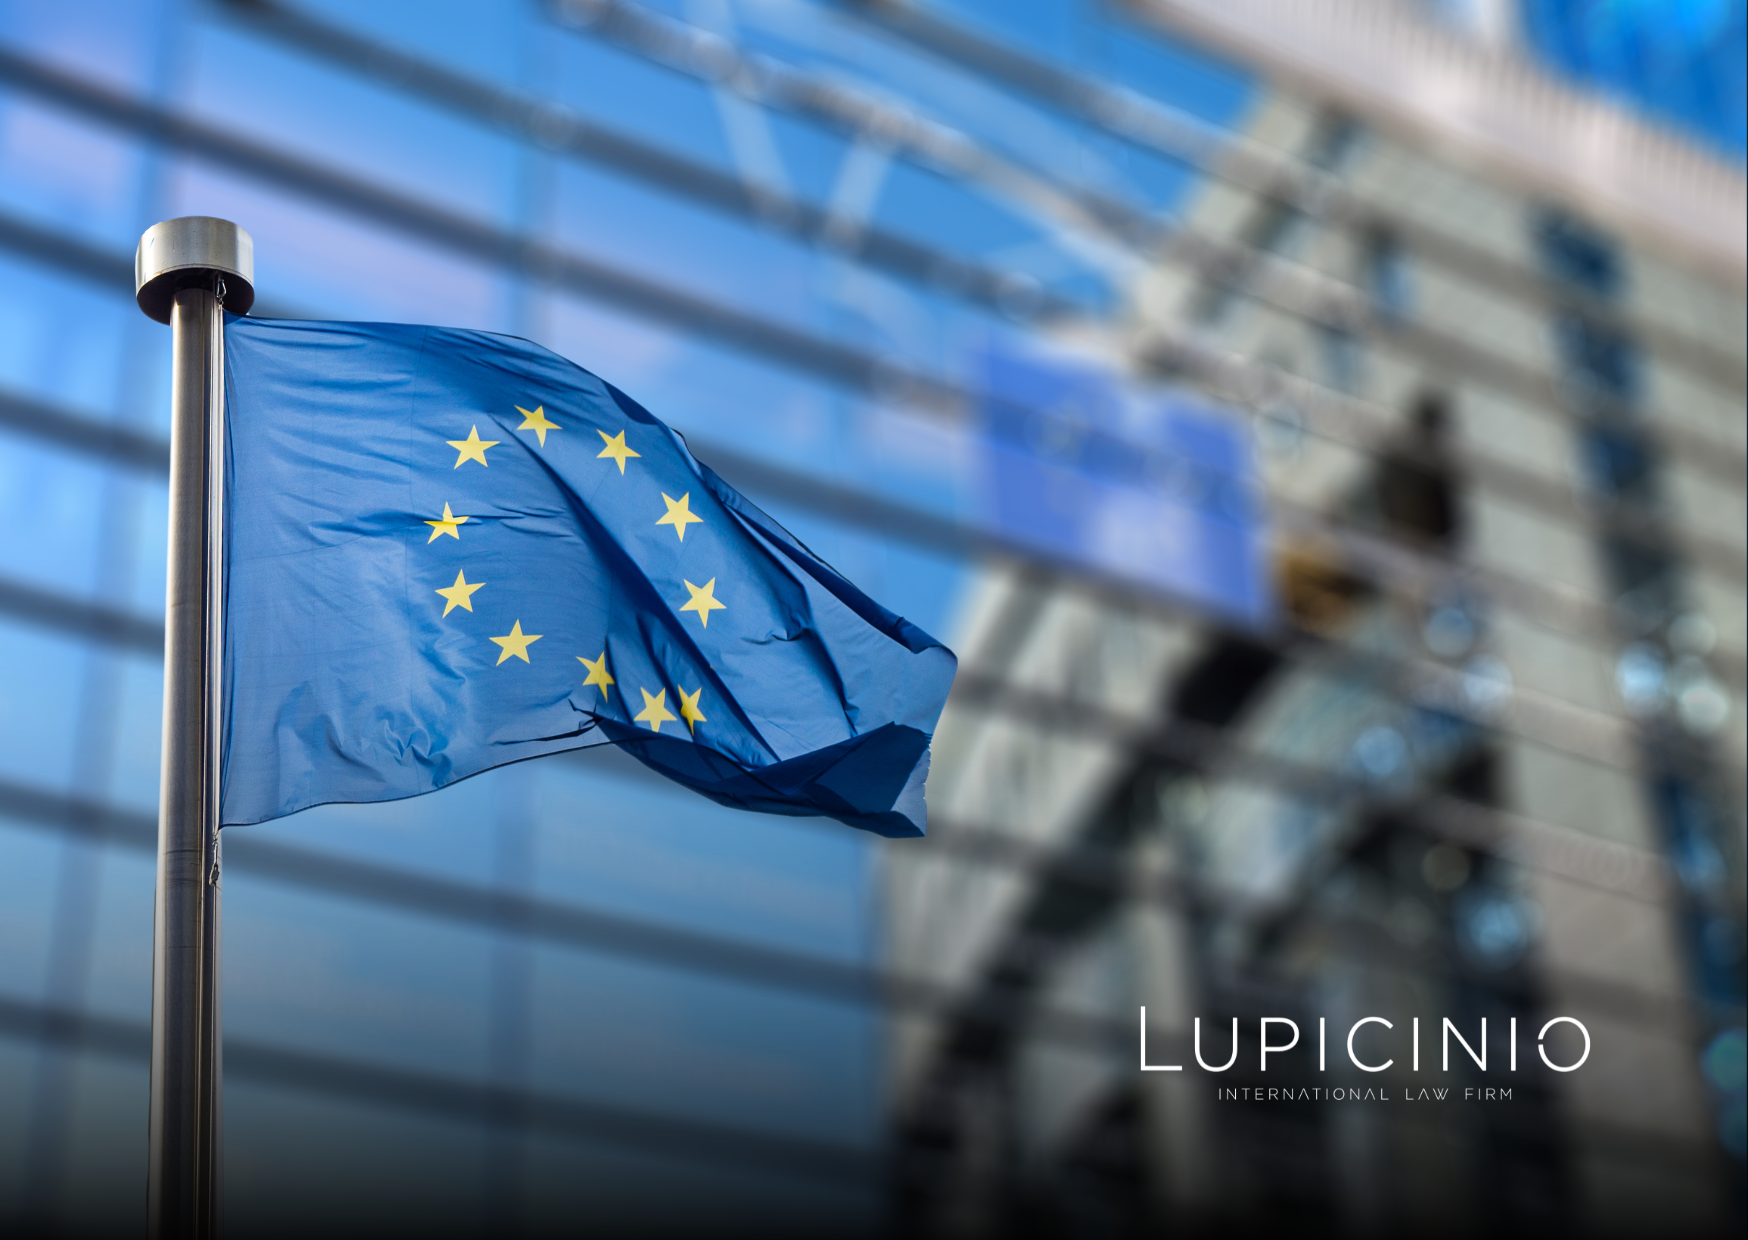 European Union: new directive on harmonization of criminal penalties for conduct infringing EU restrictive rules